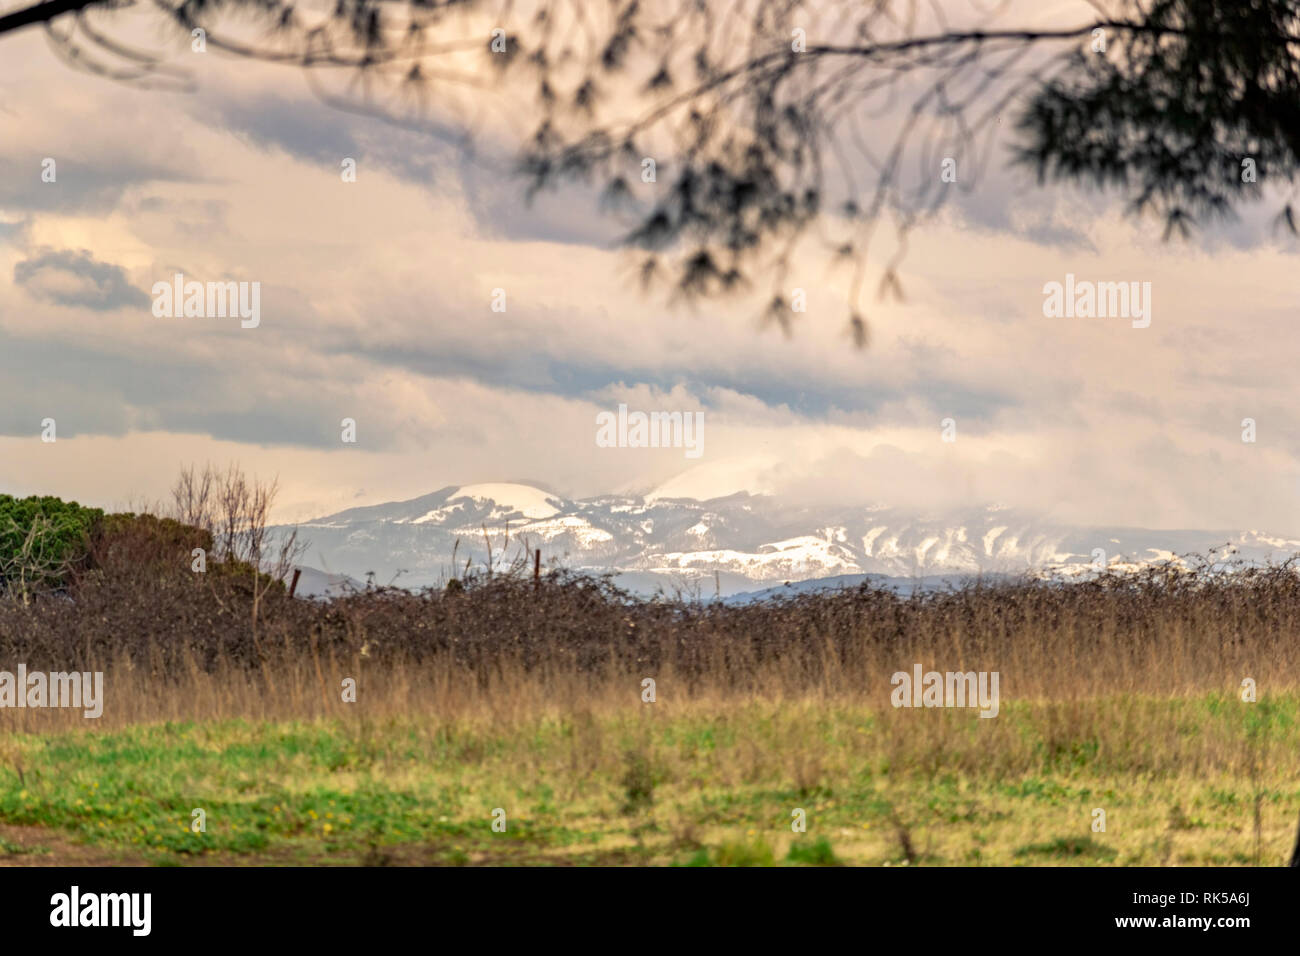 Seasonal  countryside landscape with snow mountains in the far background Stock Photo